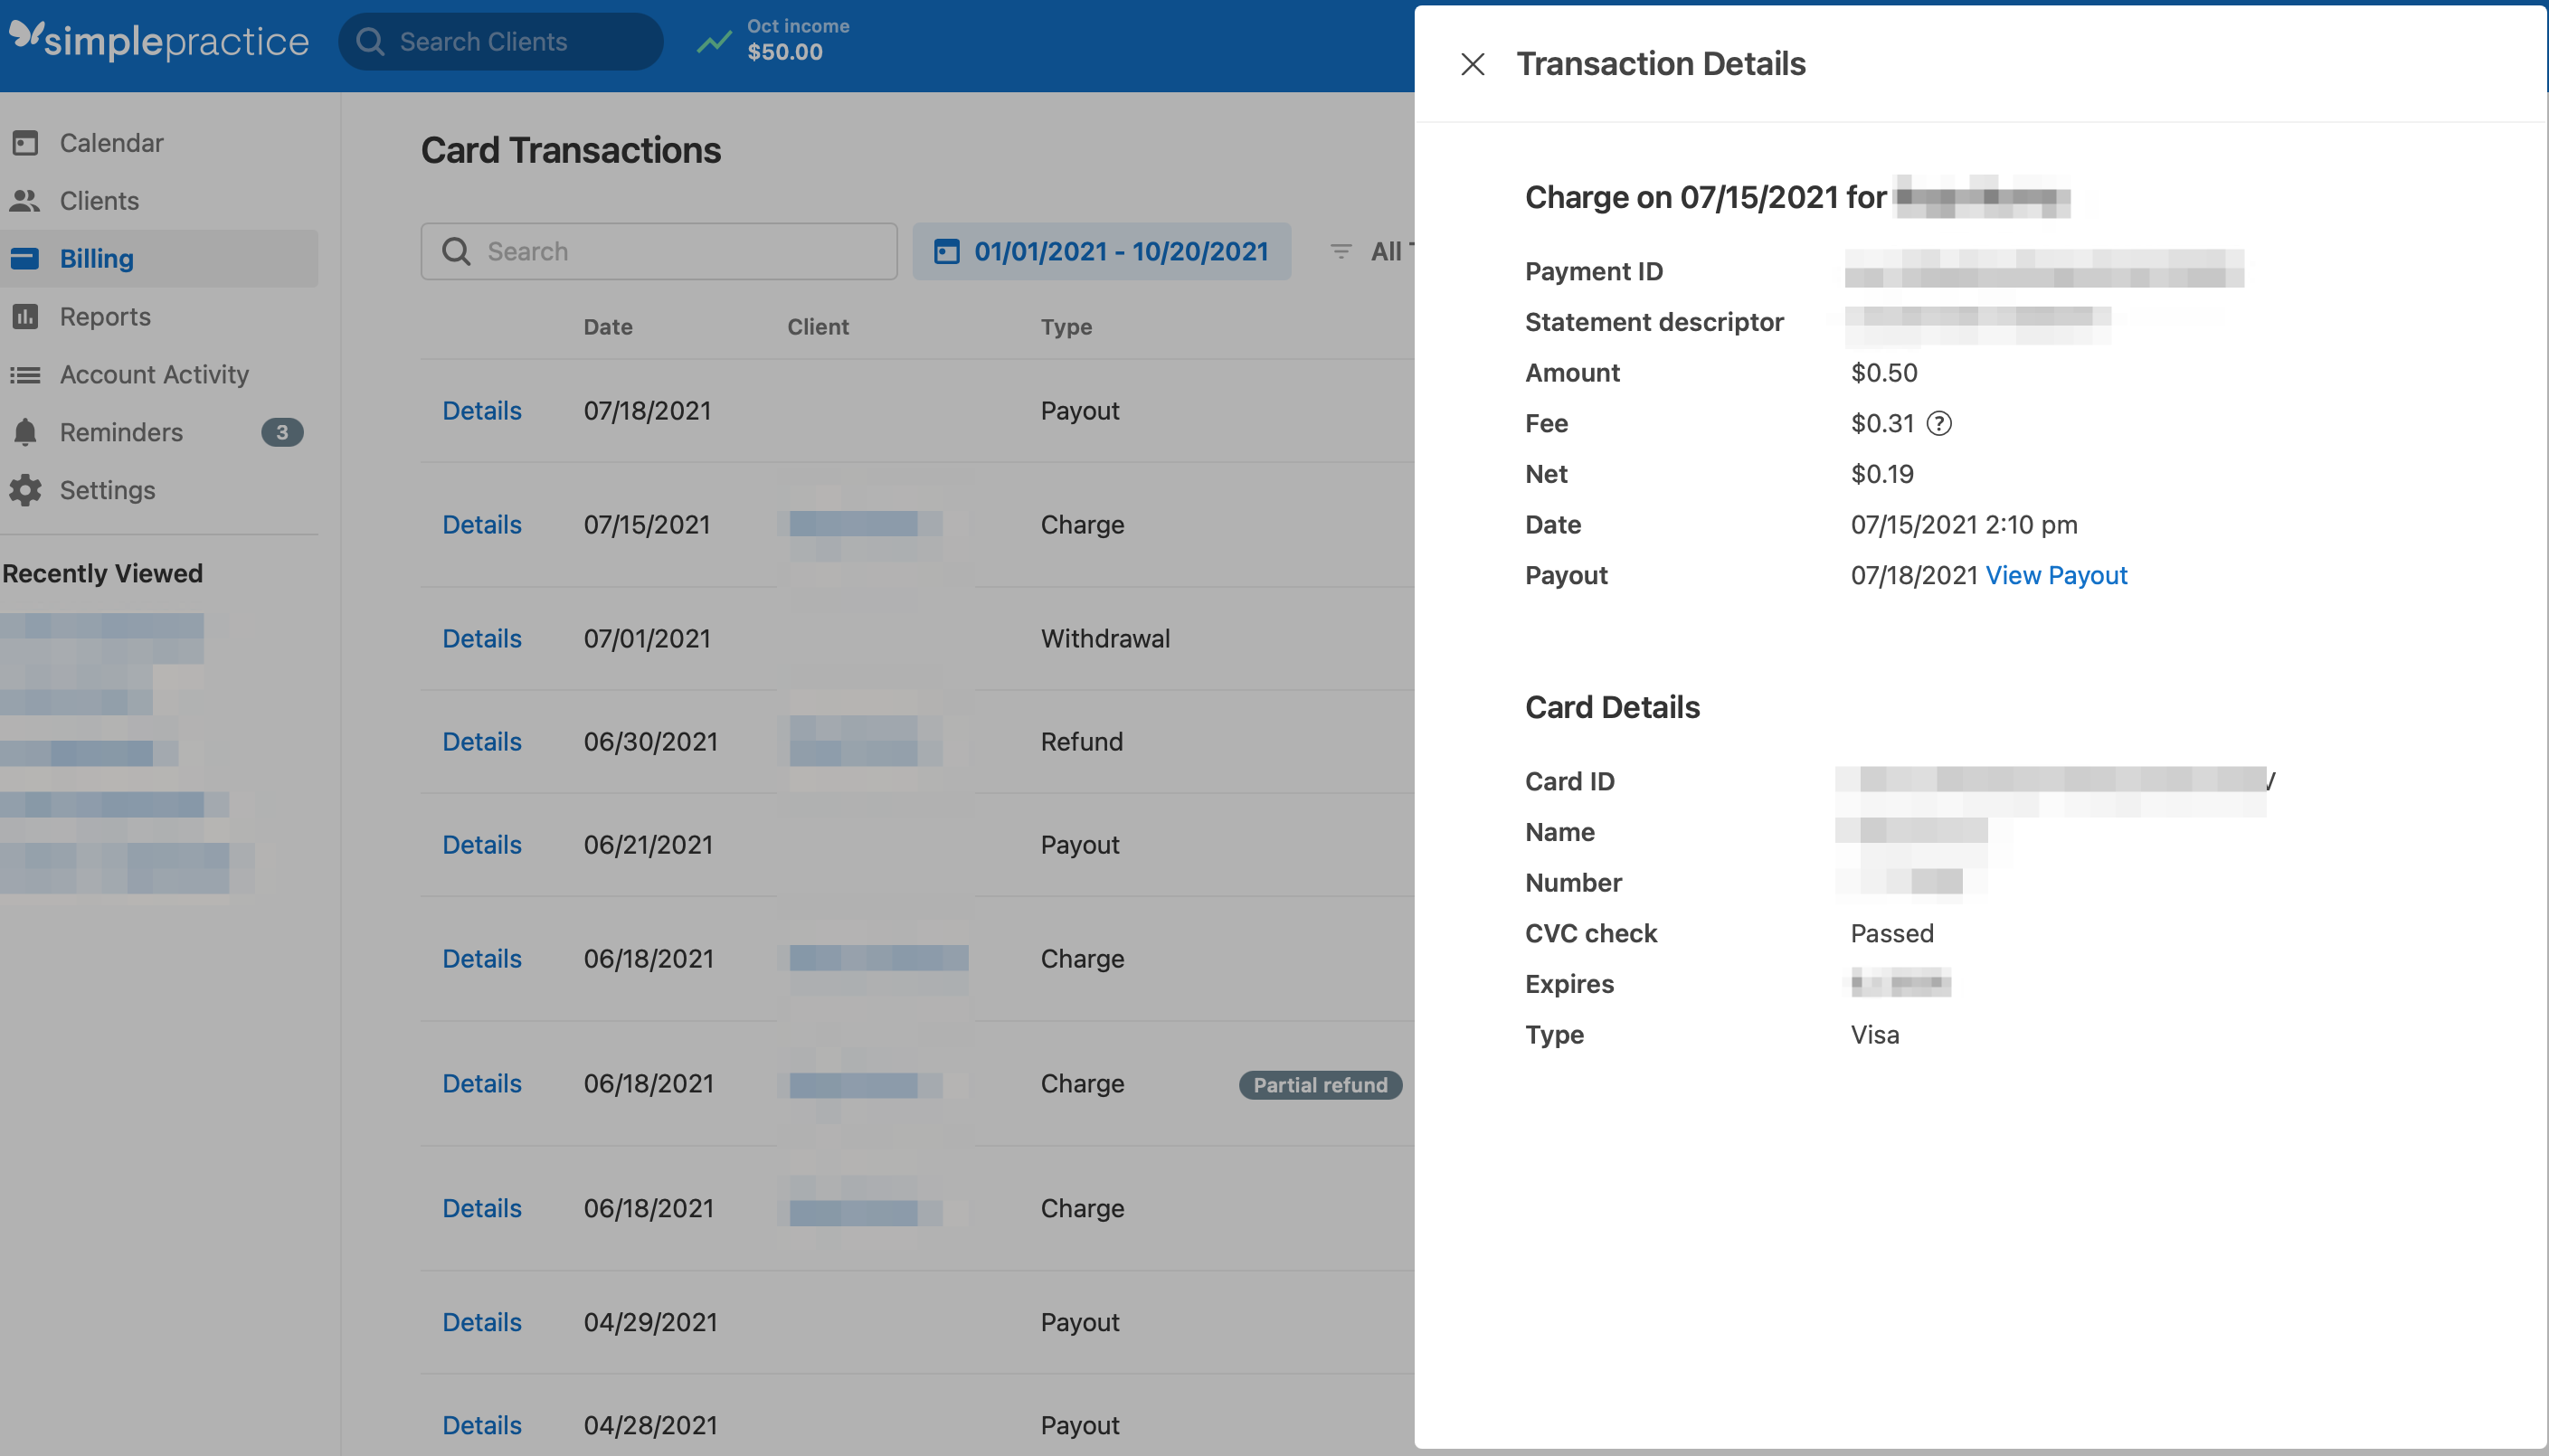 transactiondetails.simplepractice.cardtransactions.png